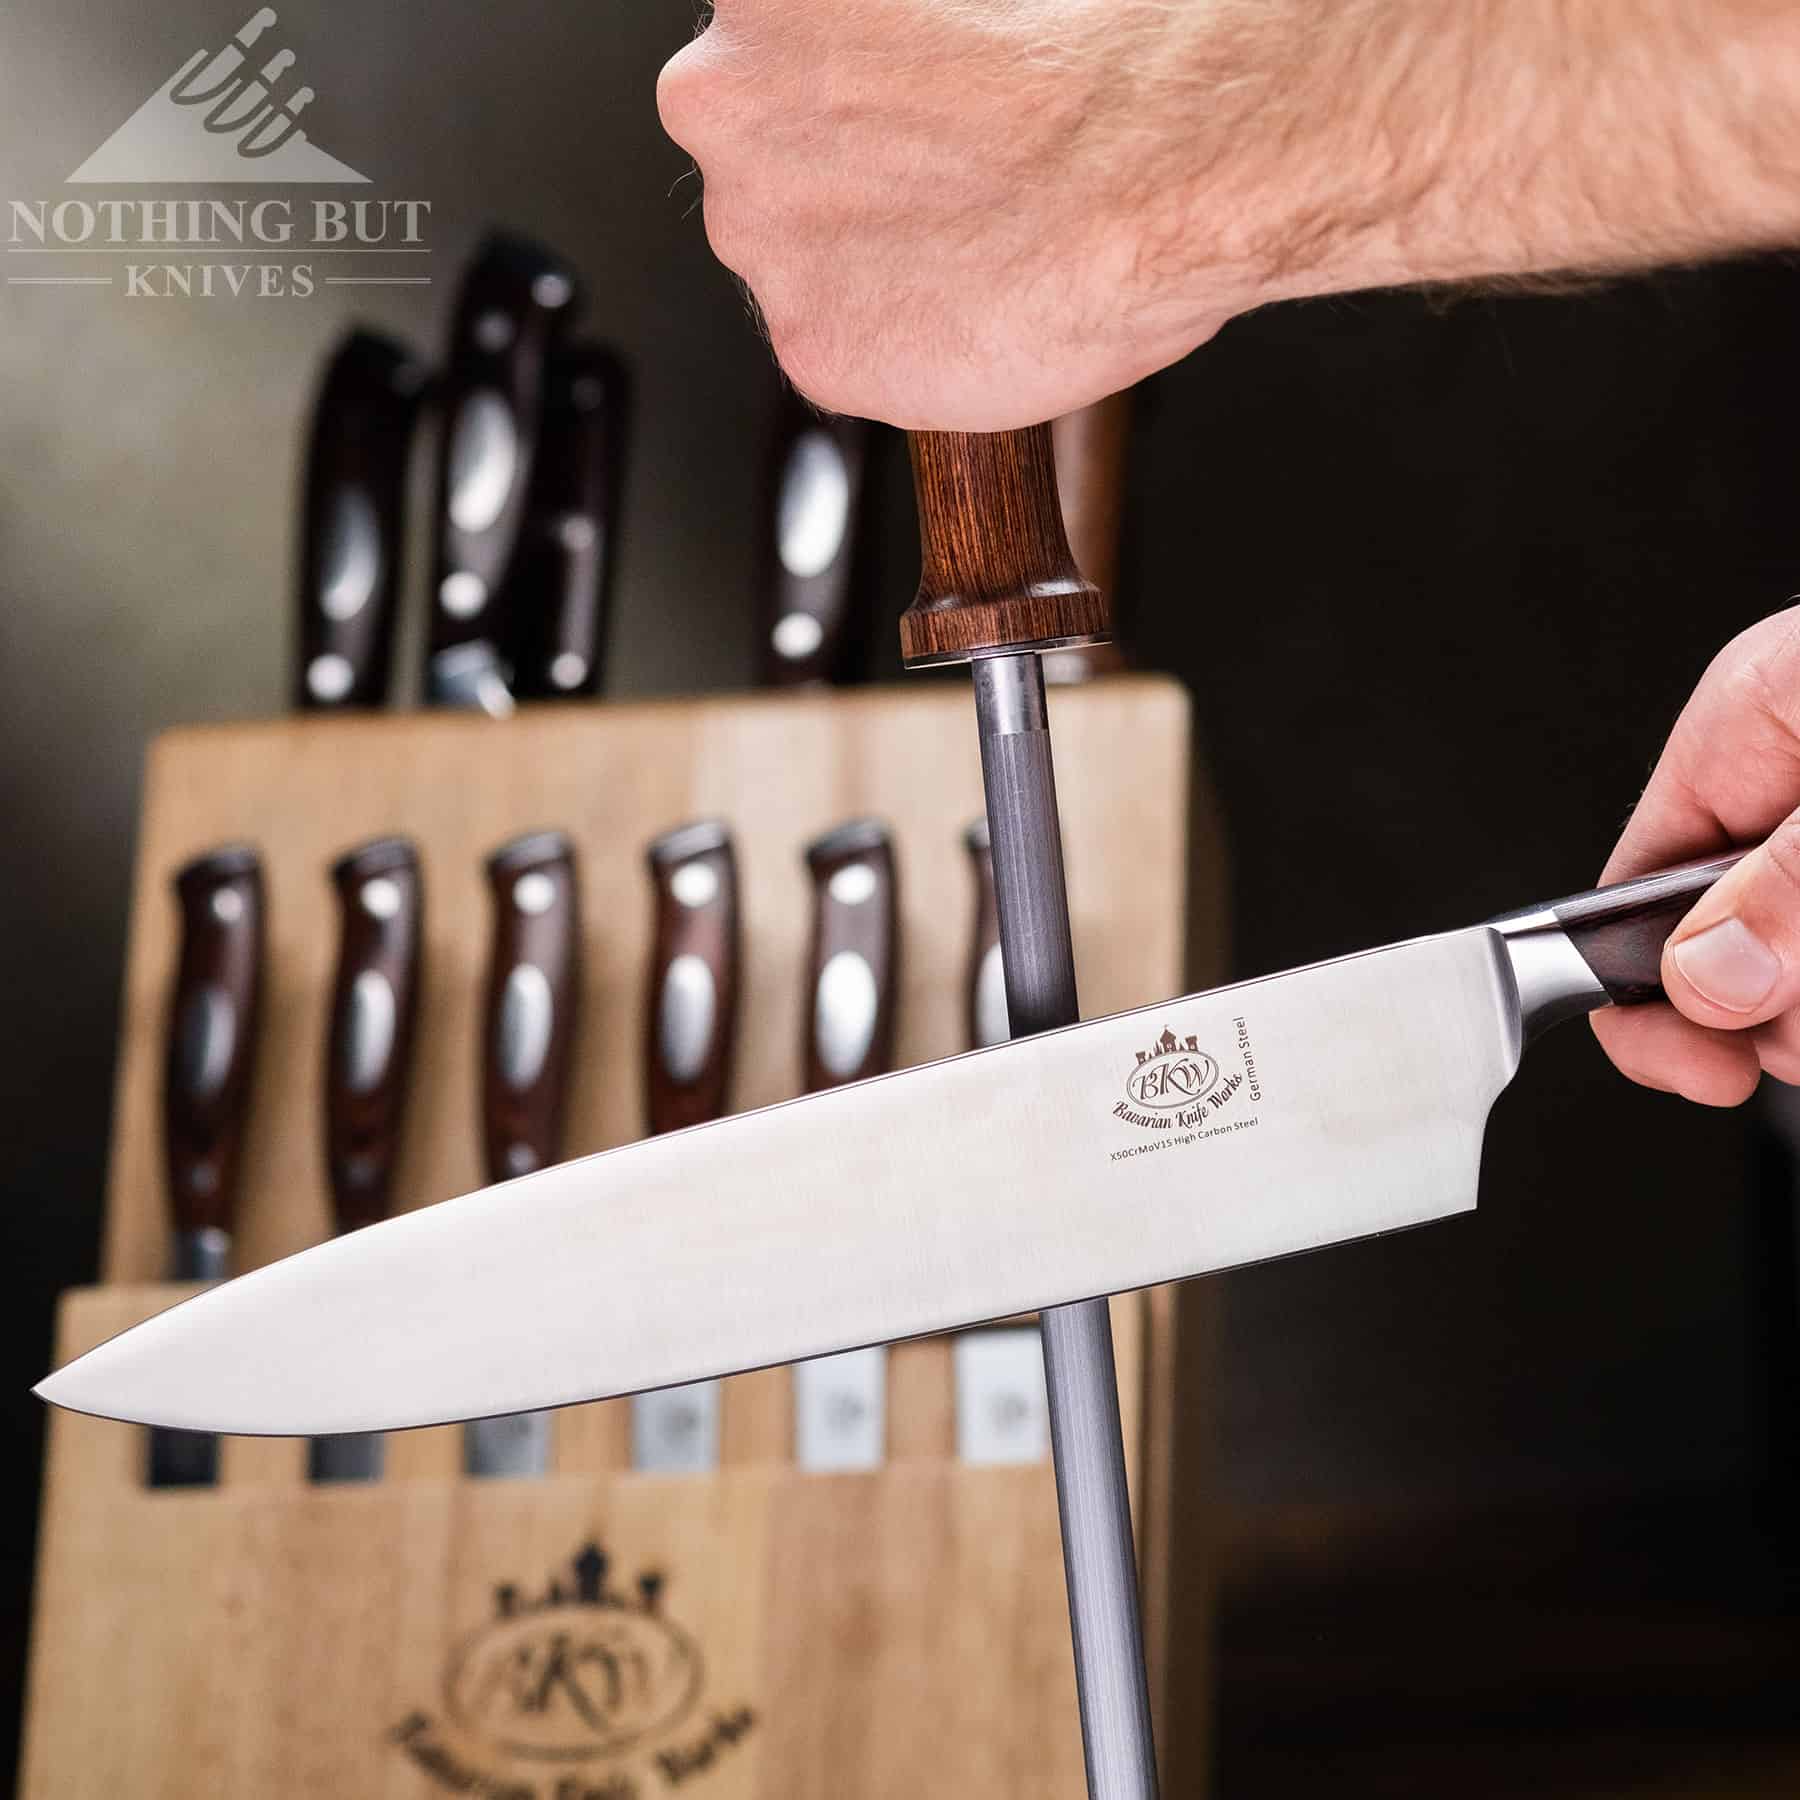 Misen Ultimate 8 Inch Chef's Knife - Pro Kitchen Knife - High Carbon  Japanese Stainless Steel - Hybrid German and Japanese style blade -  Craftsmanship